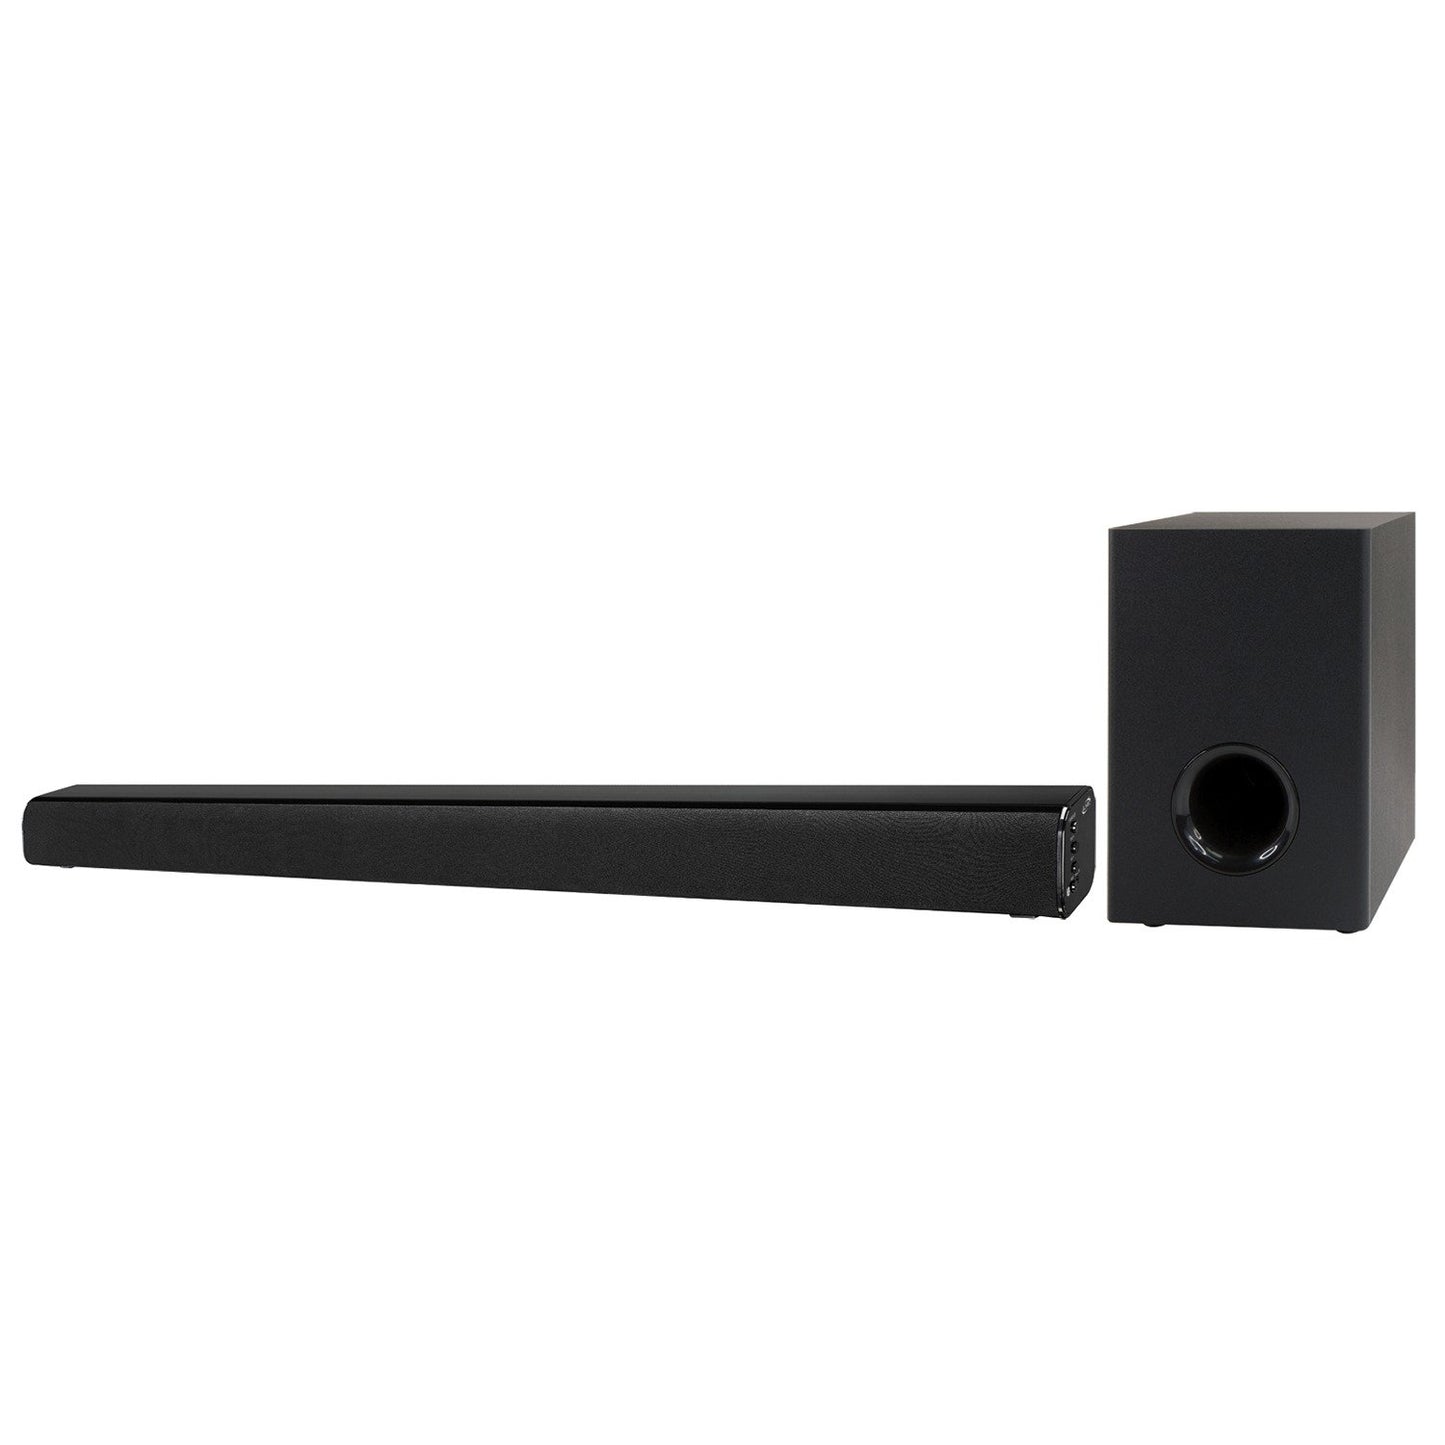 iLive ITBSW399B 37" HD Sound Bar w/Bluetooth and Wireless Subwoofer